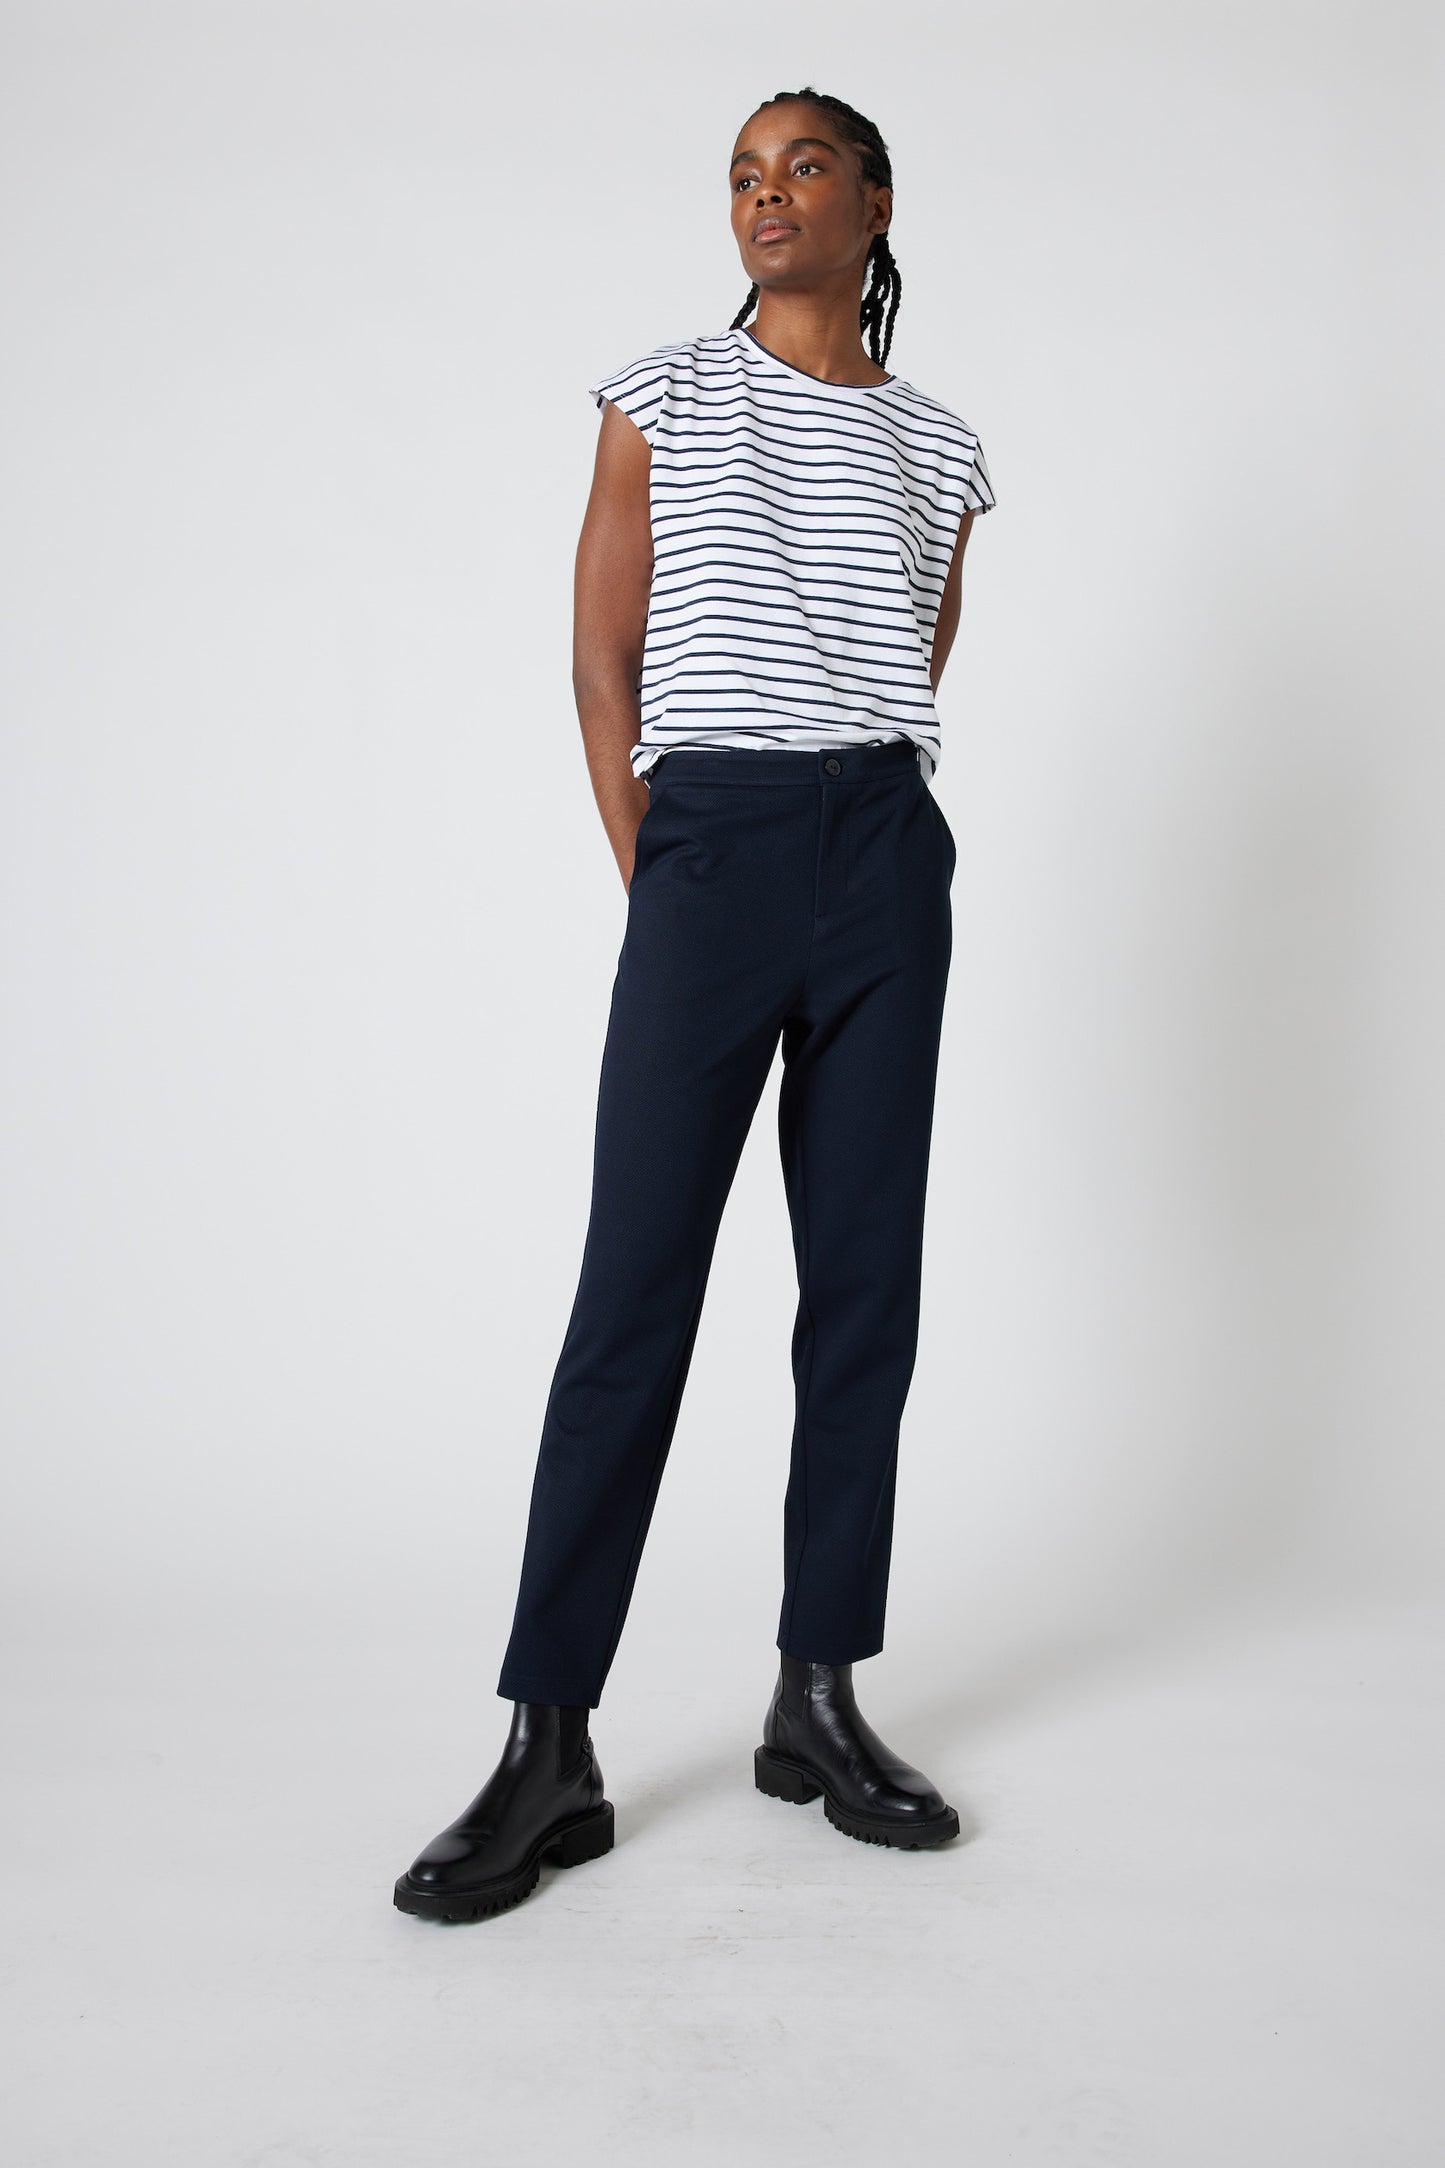 The Textured Comfort Trouser